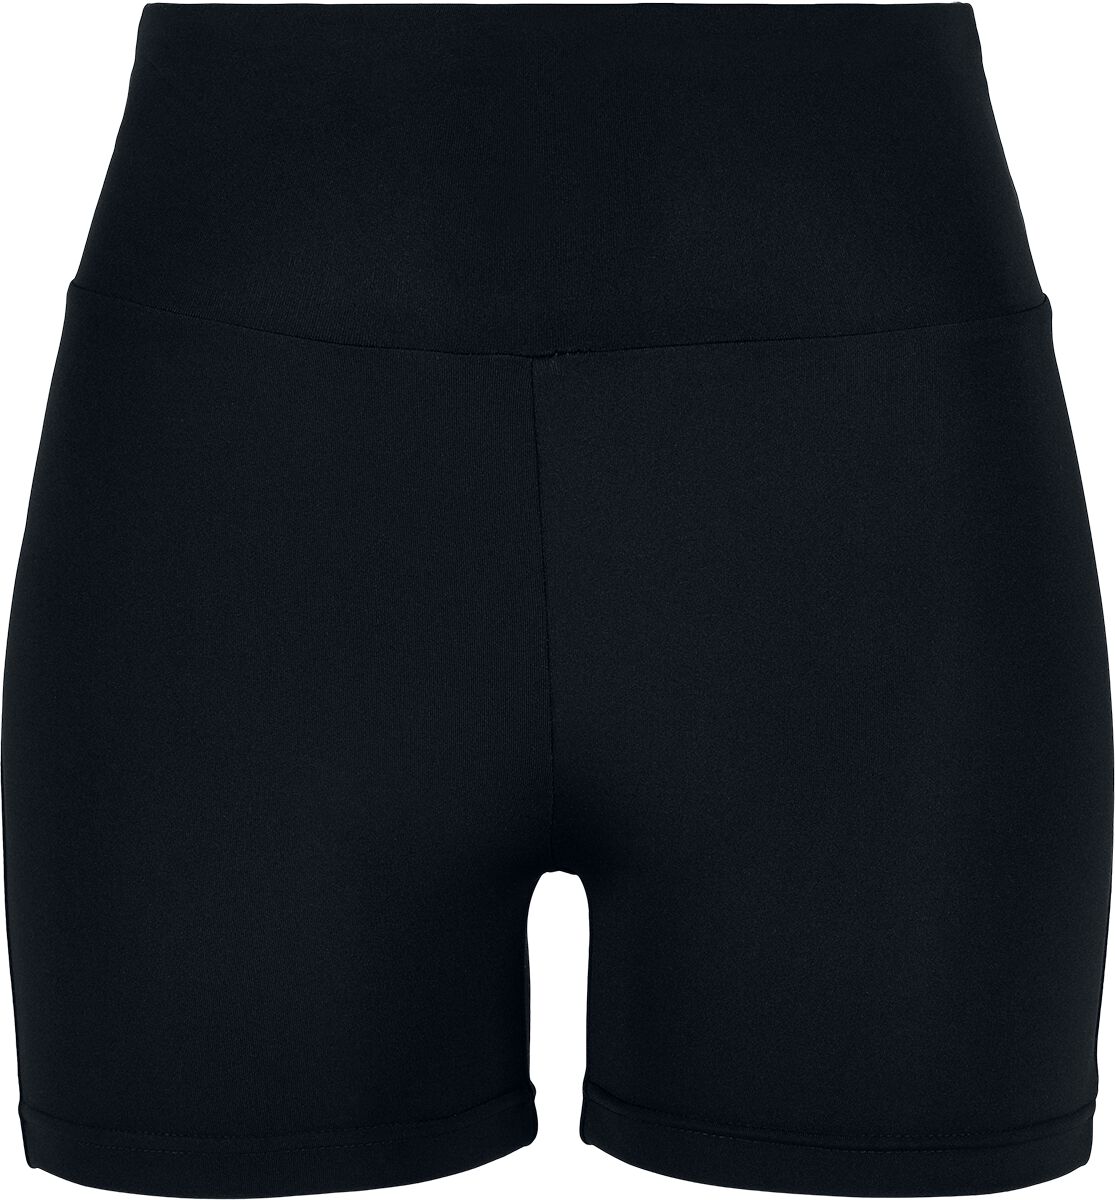 Urban Classics Ladies Recycled High Waist Cycle Hot Pants Hotpant schwarz in L